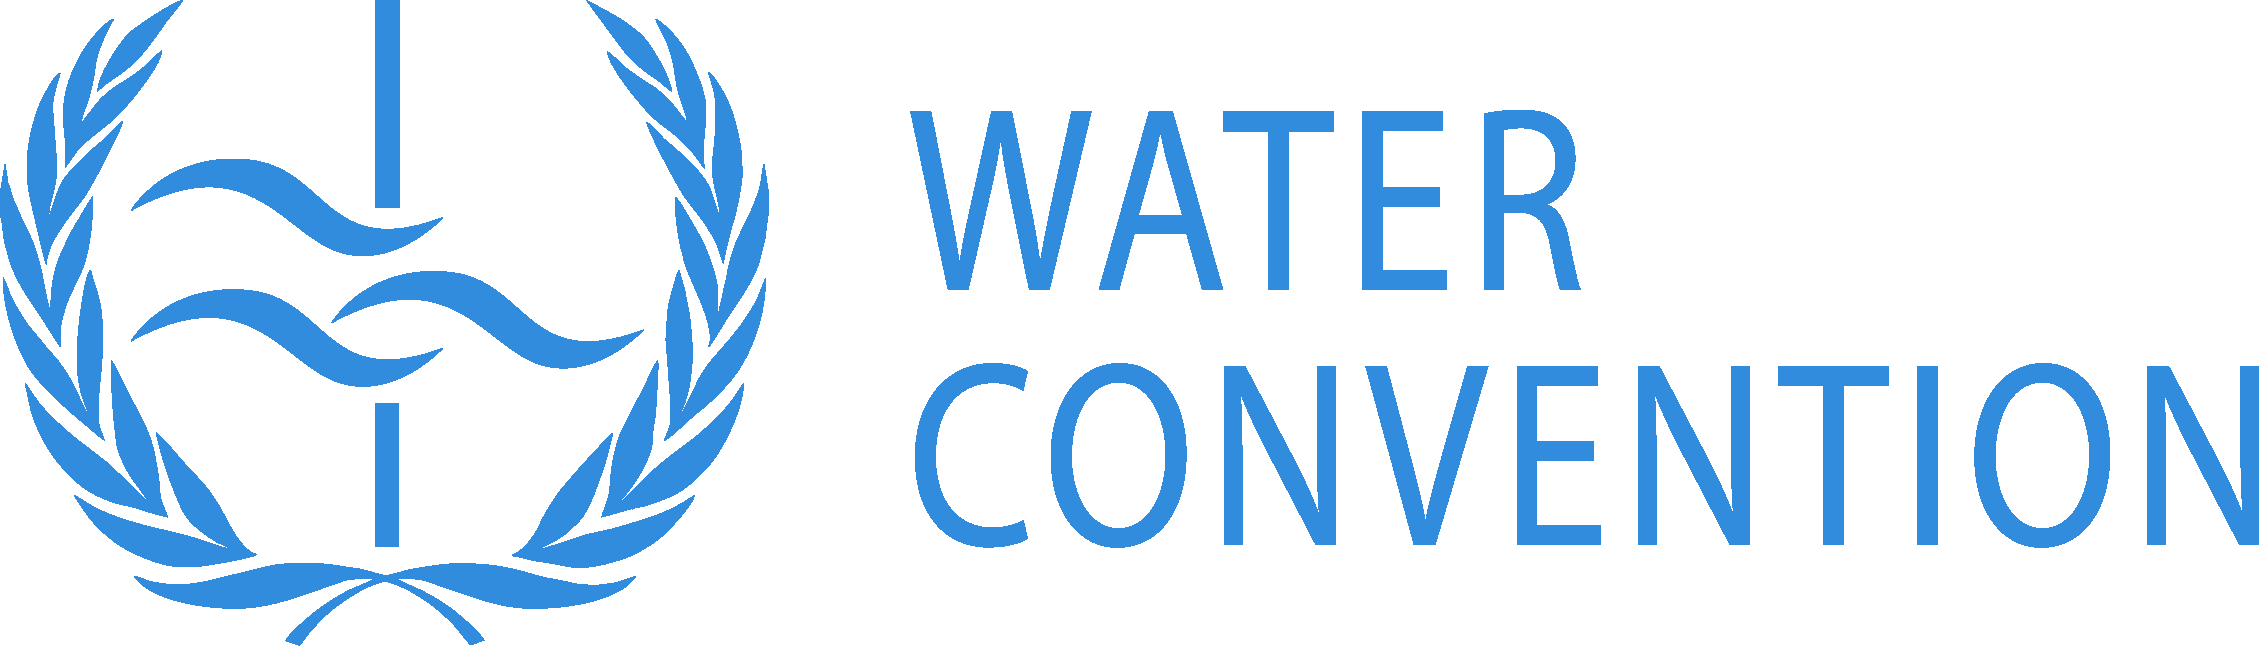 water_convention_logo_vector.png